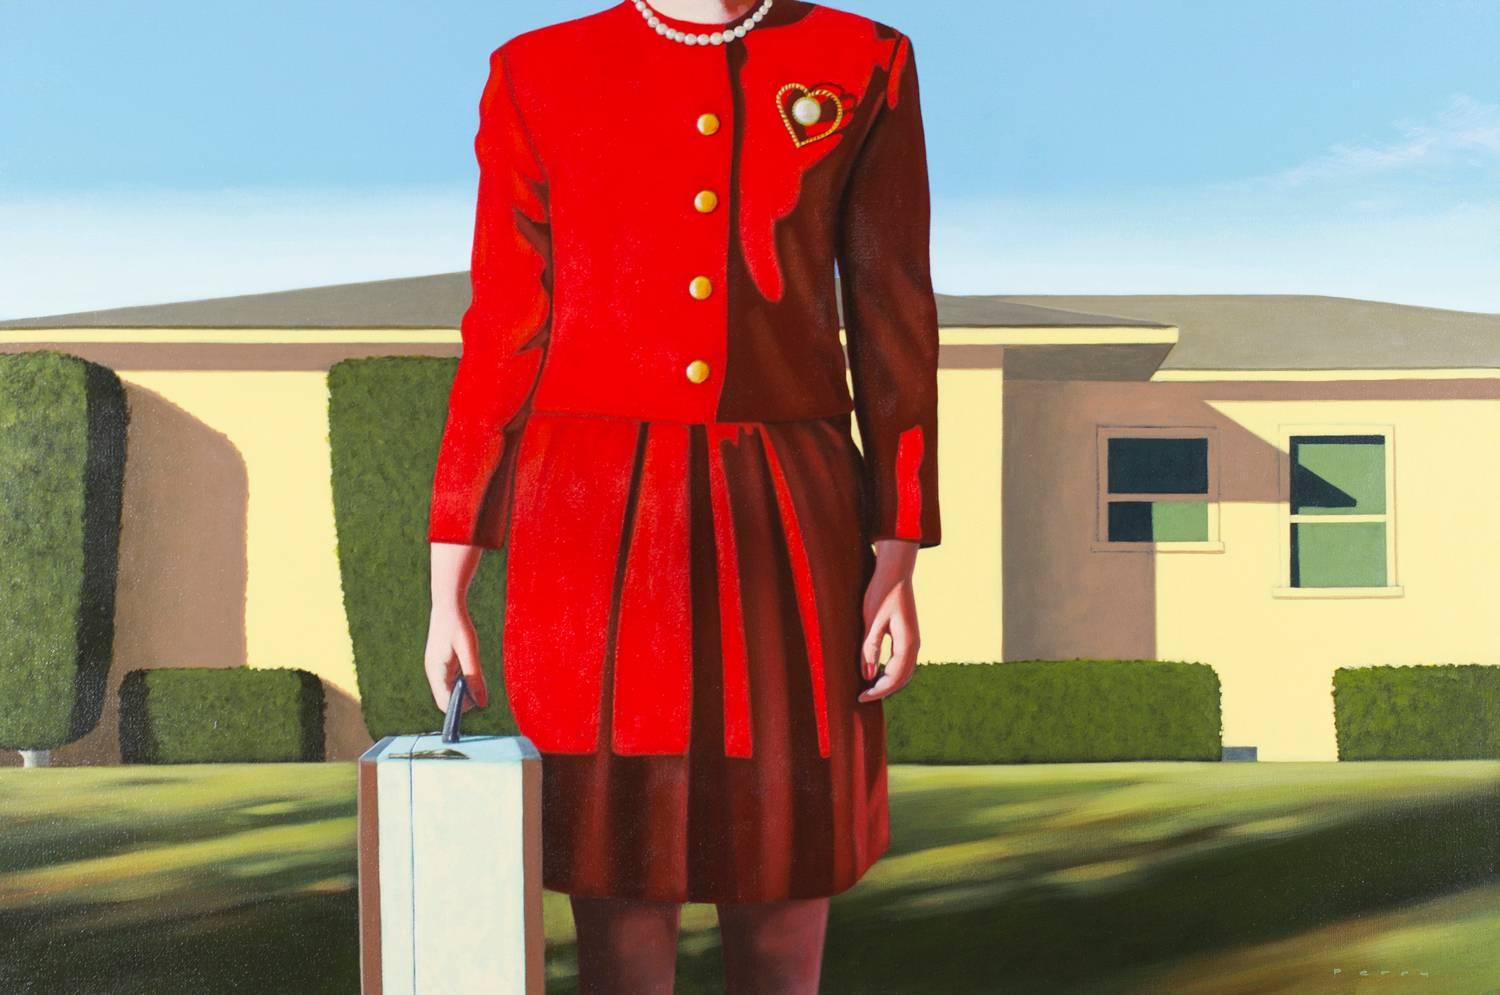 The Traveler II - Painting by Jamie Perry